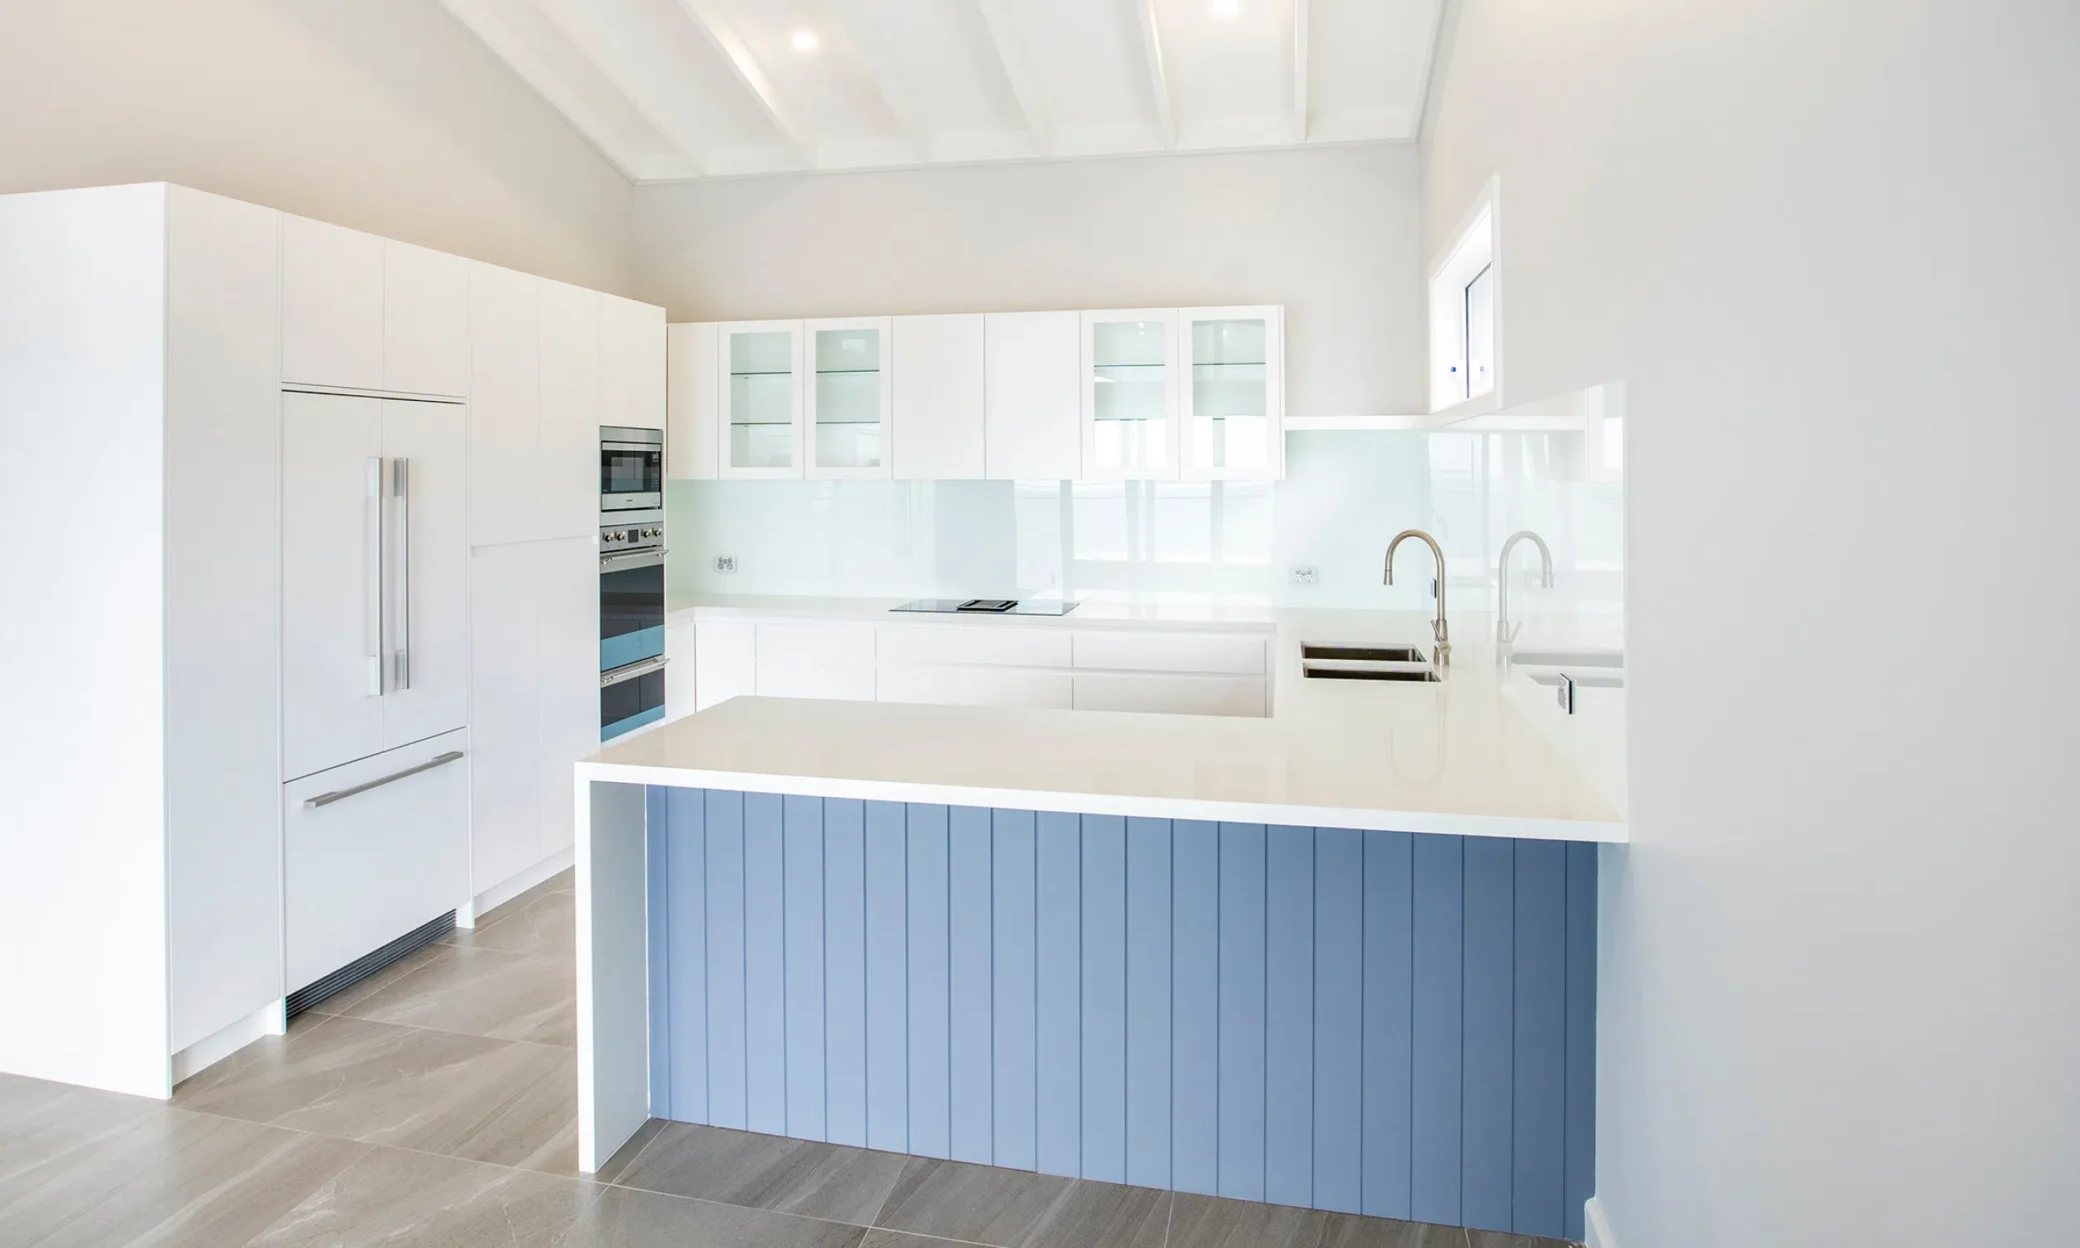 Modern kitchen with white and light blue cabinetry, stainless steel appliances, and gray tile floors. There's a central island with a sink under bright natural light, perfect for custom built projects in